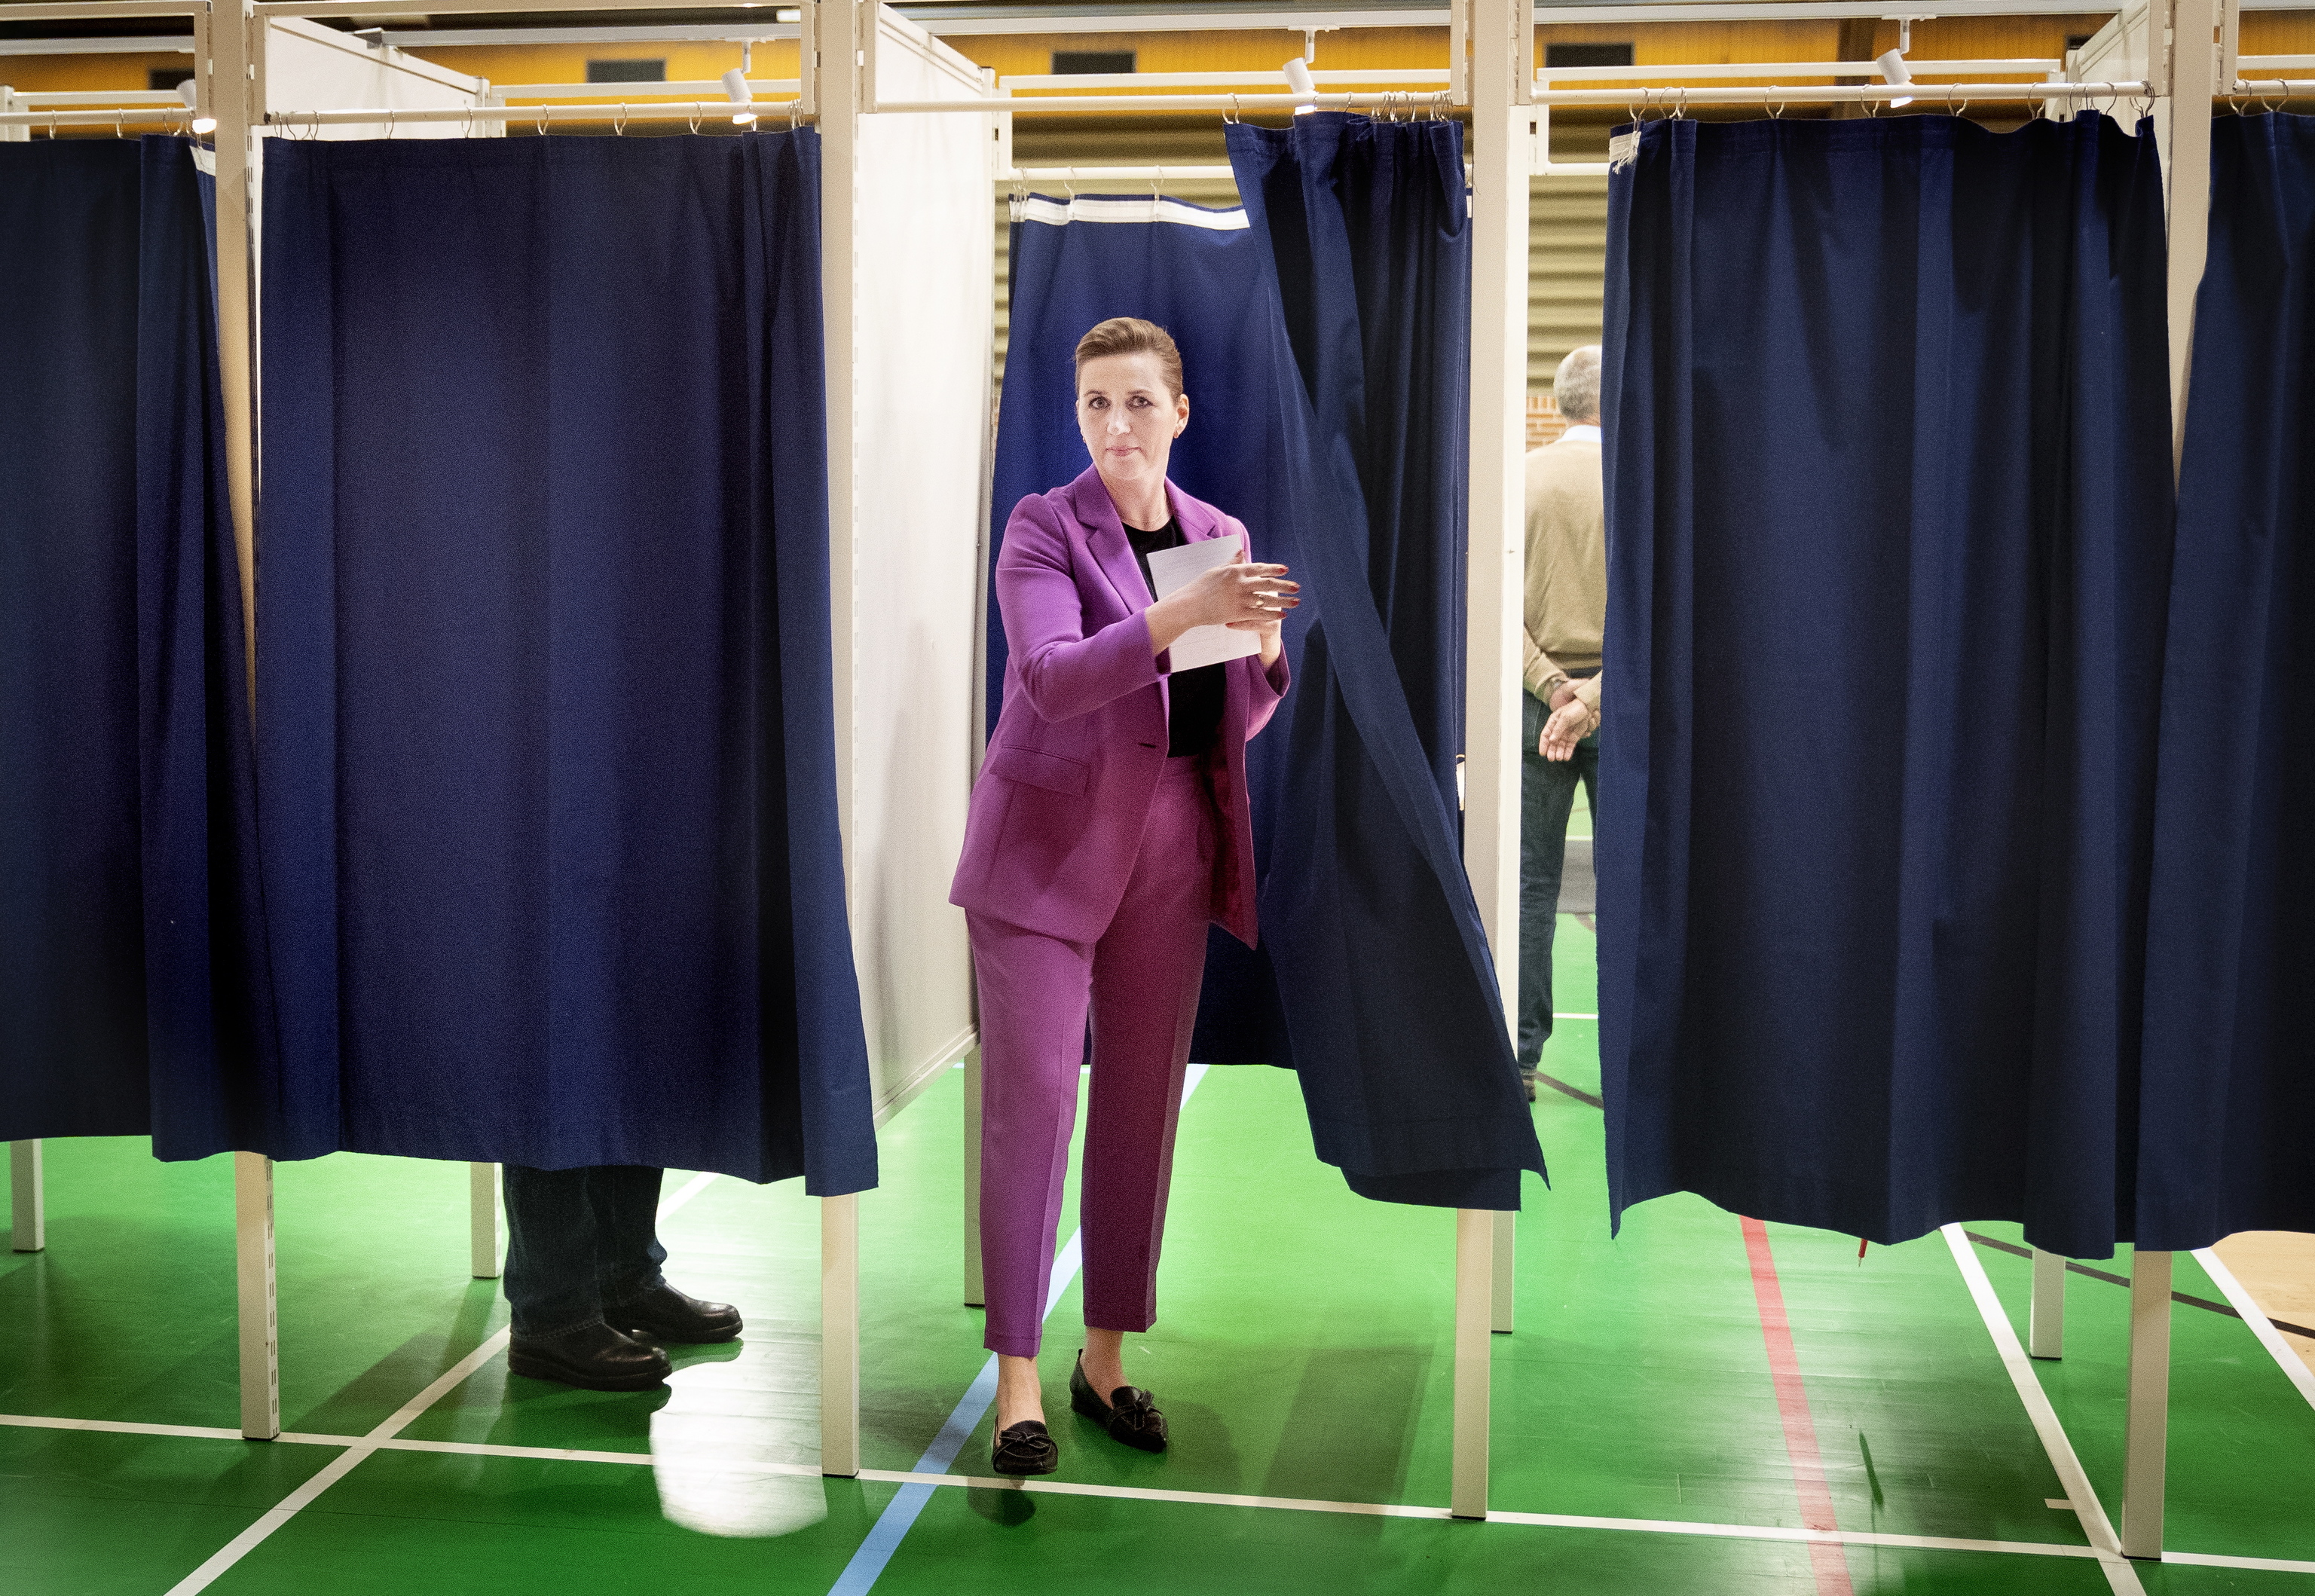 Denmark's Prime Minister Mette Fredriksson voted in reference